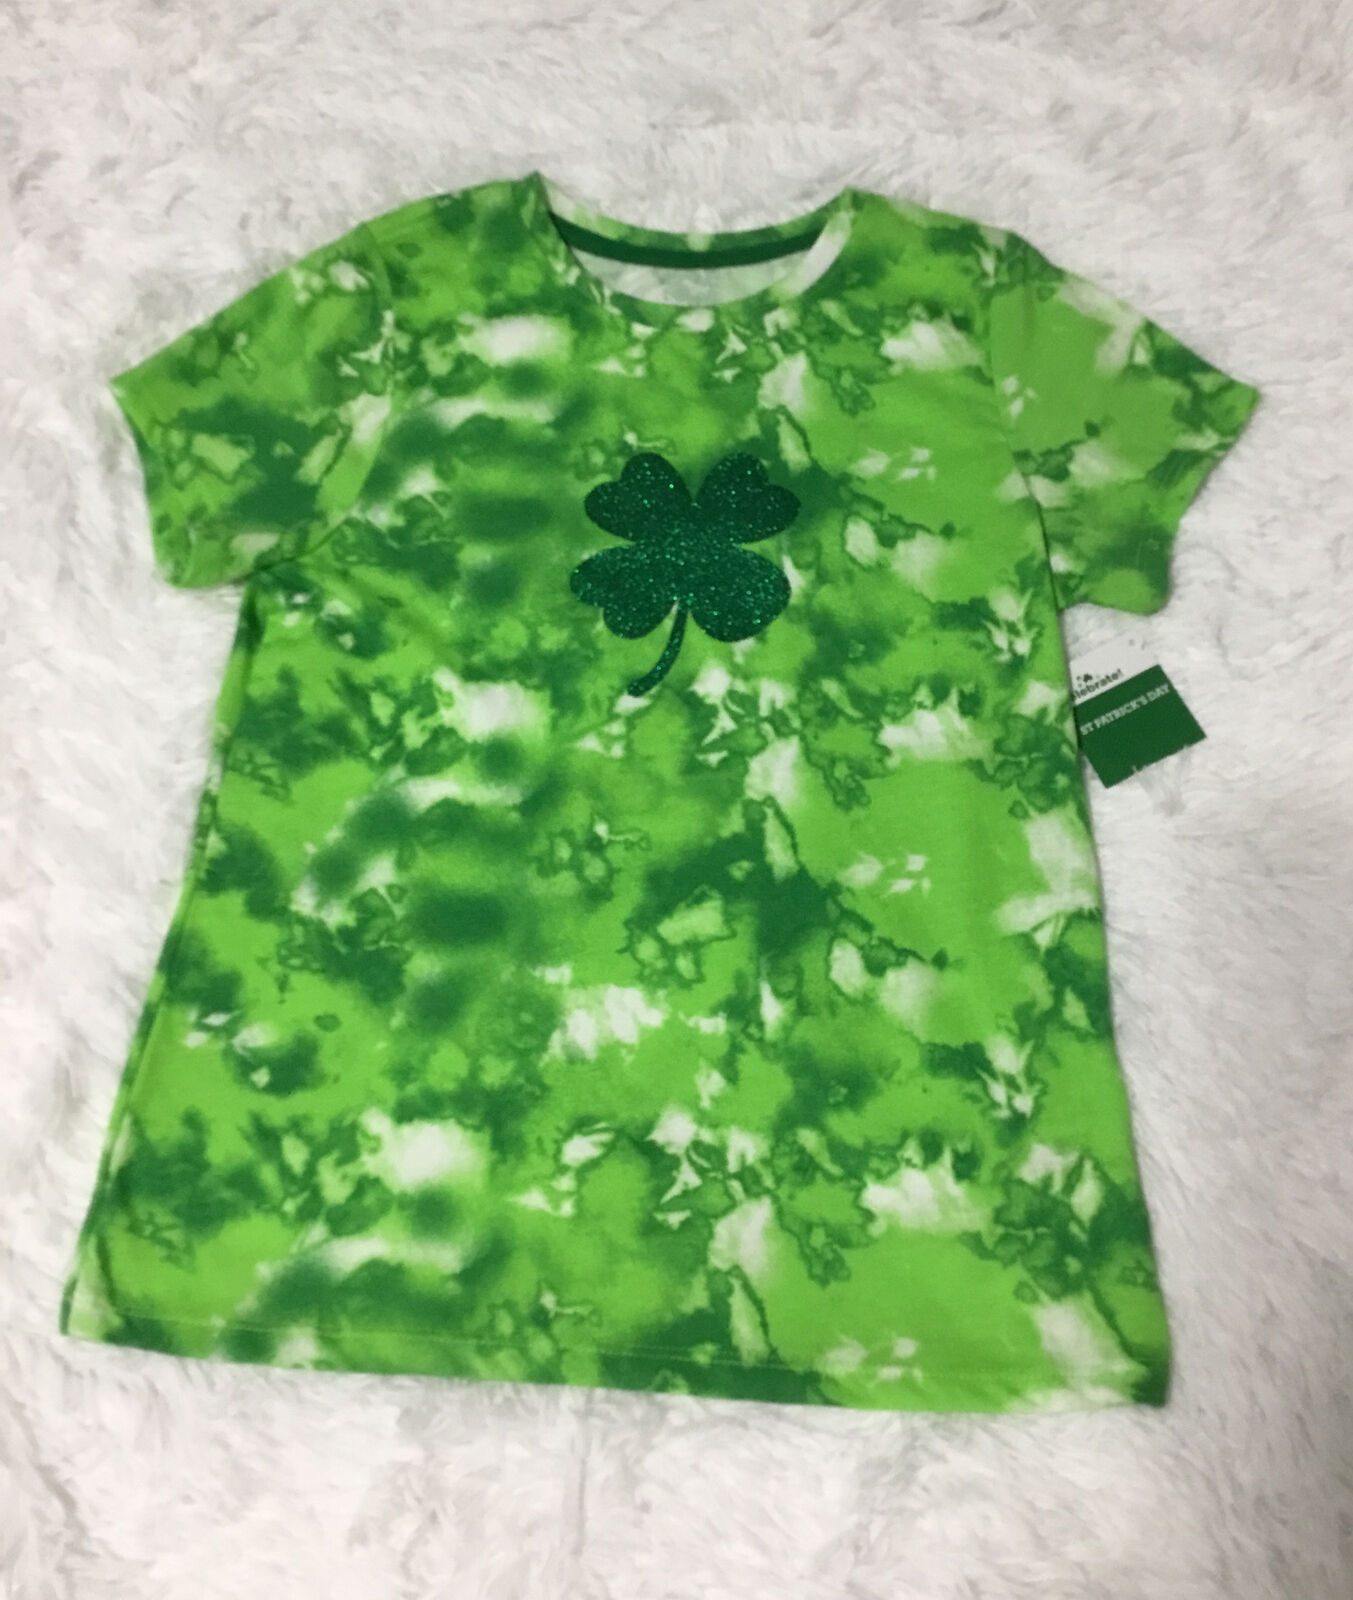 Way To Celebrate St. Patricks Day Regular discount Max 48% OFF Green Shirt Sleeve Size Short